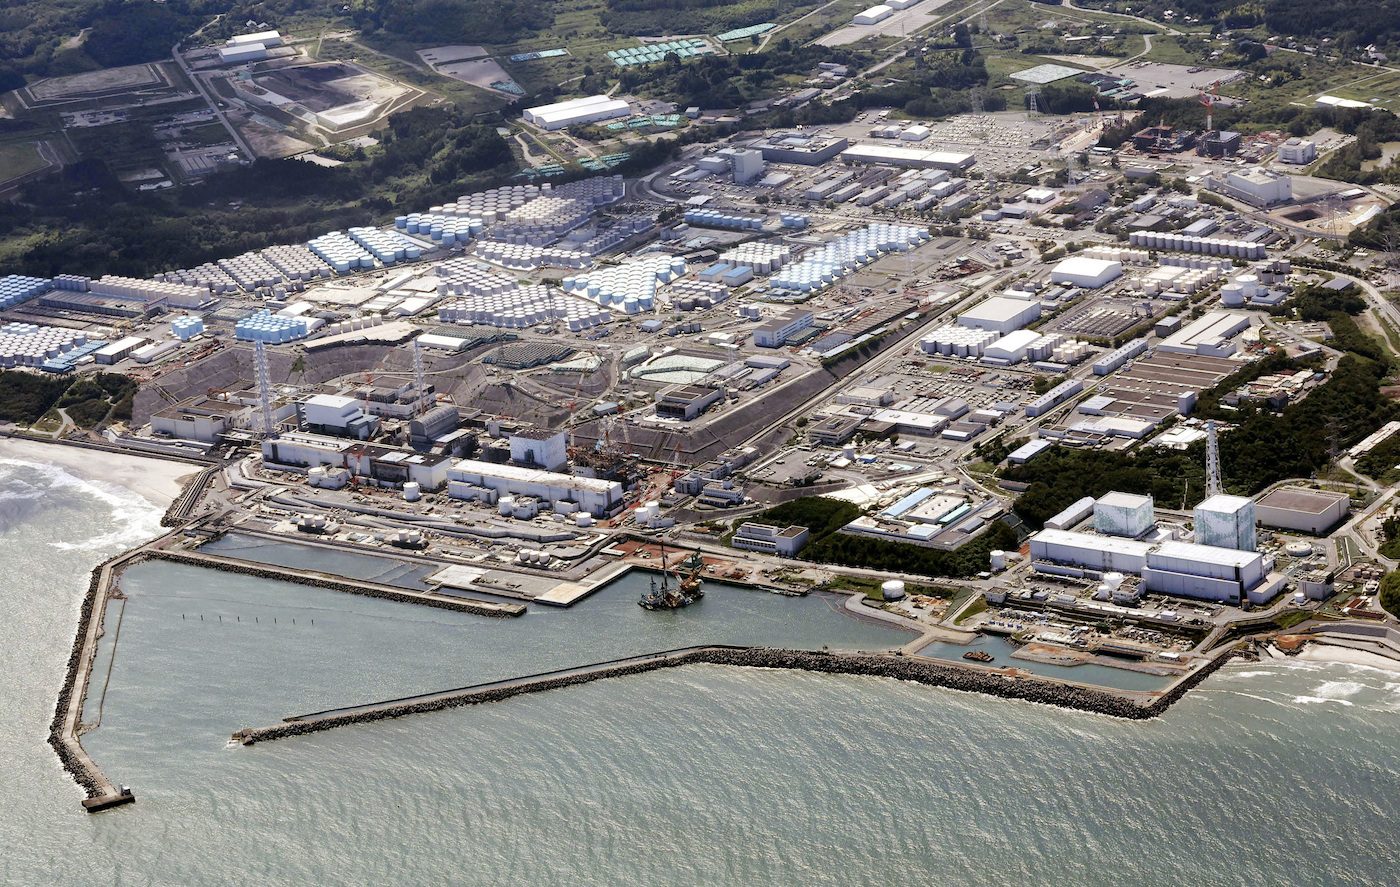 Japan releases Fukushima water into the ocean, prompting criticism, seafood bans